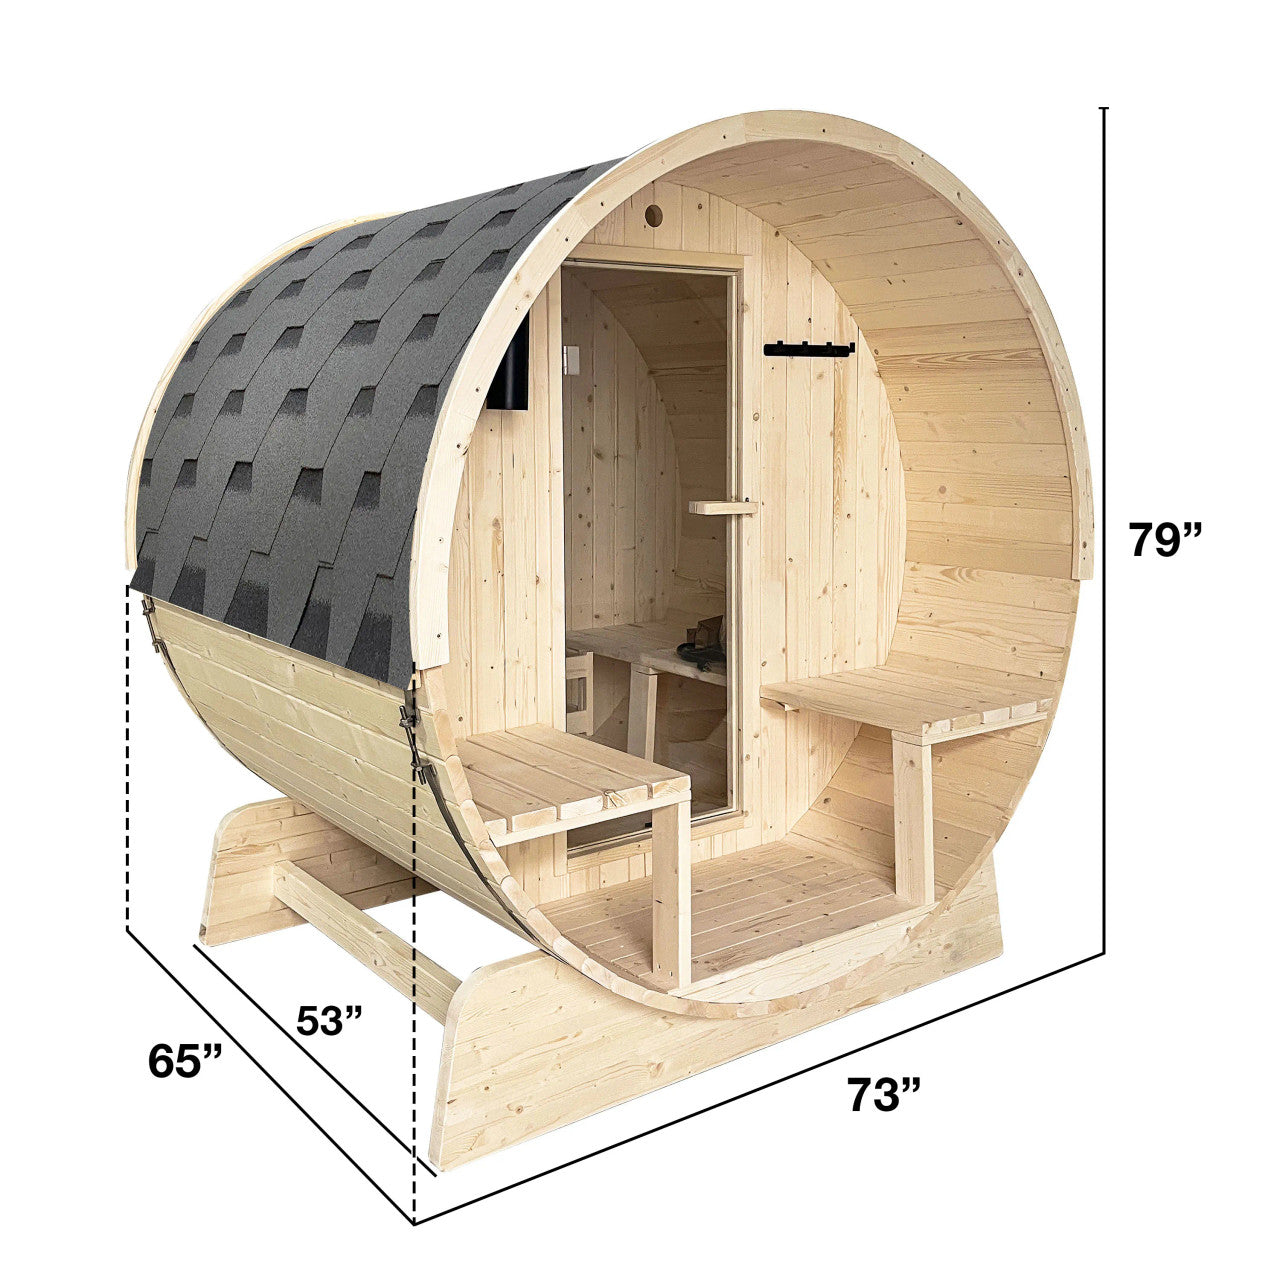 Aleko Outdoor or Indoor White Finland Pine Wet Dry Barrel Sauna - 3-5 Person - Front Porch Canopy - 4.5 kW UL Certified - Bitumen Shingle Roofing SB5PINECP-AP - Serenity Provision